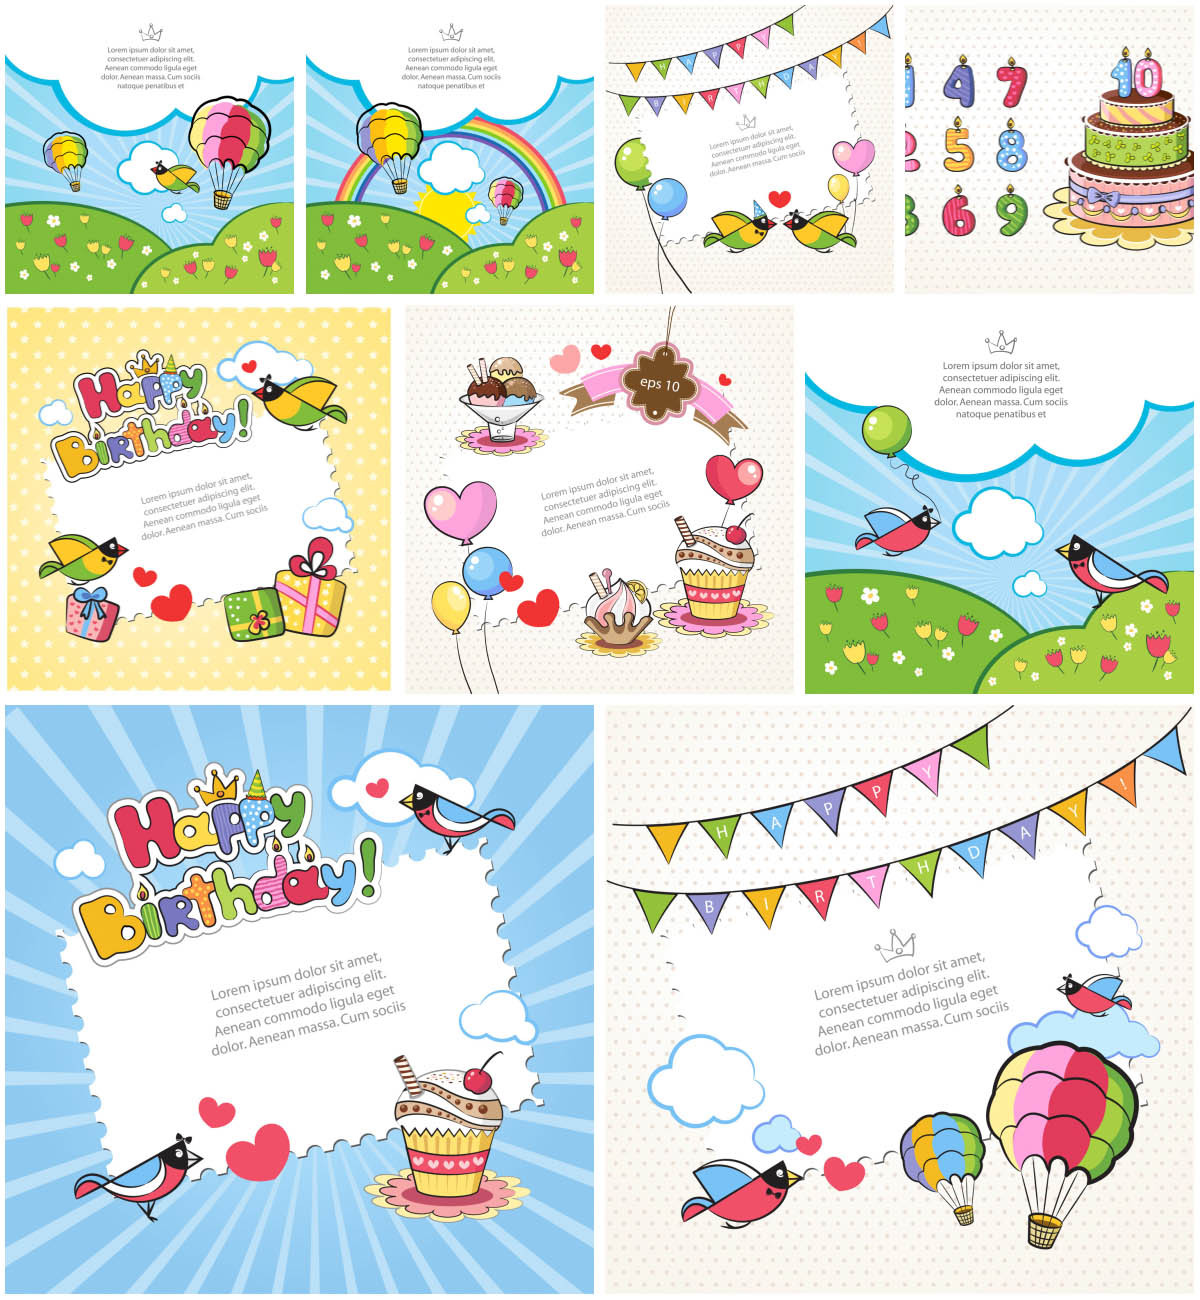 The Best Ideas for Printable Birthday Cards for Kids - Home, Family